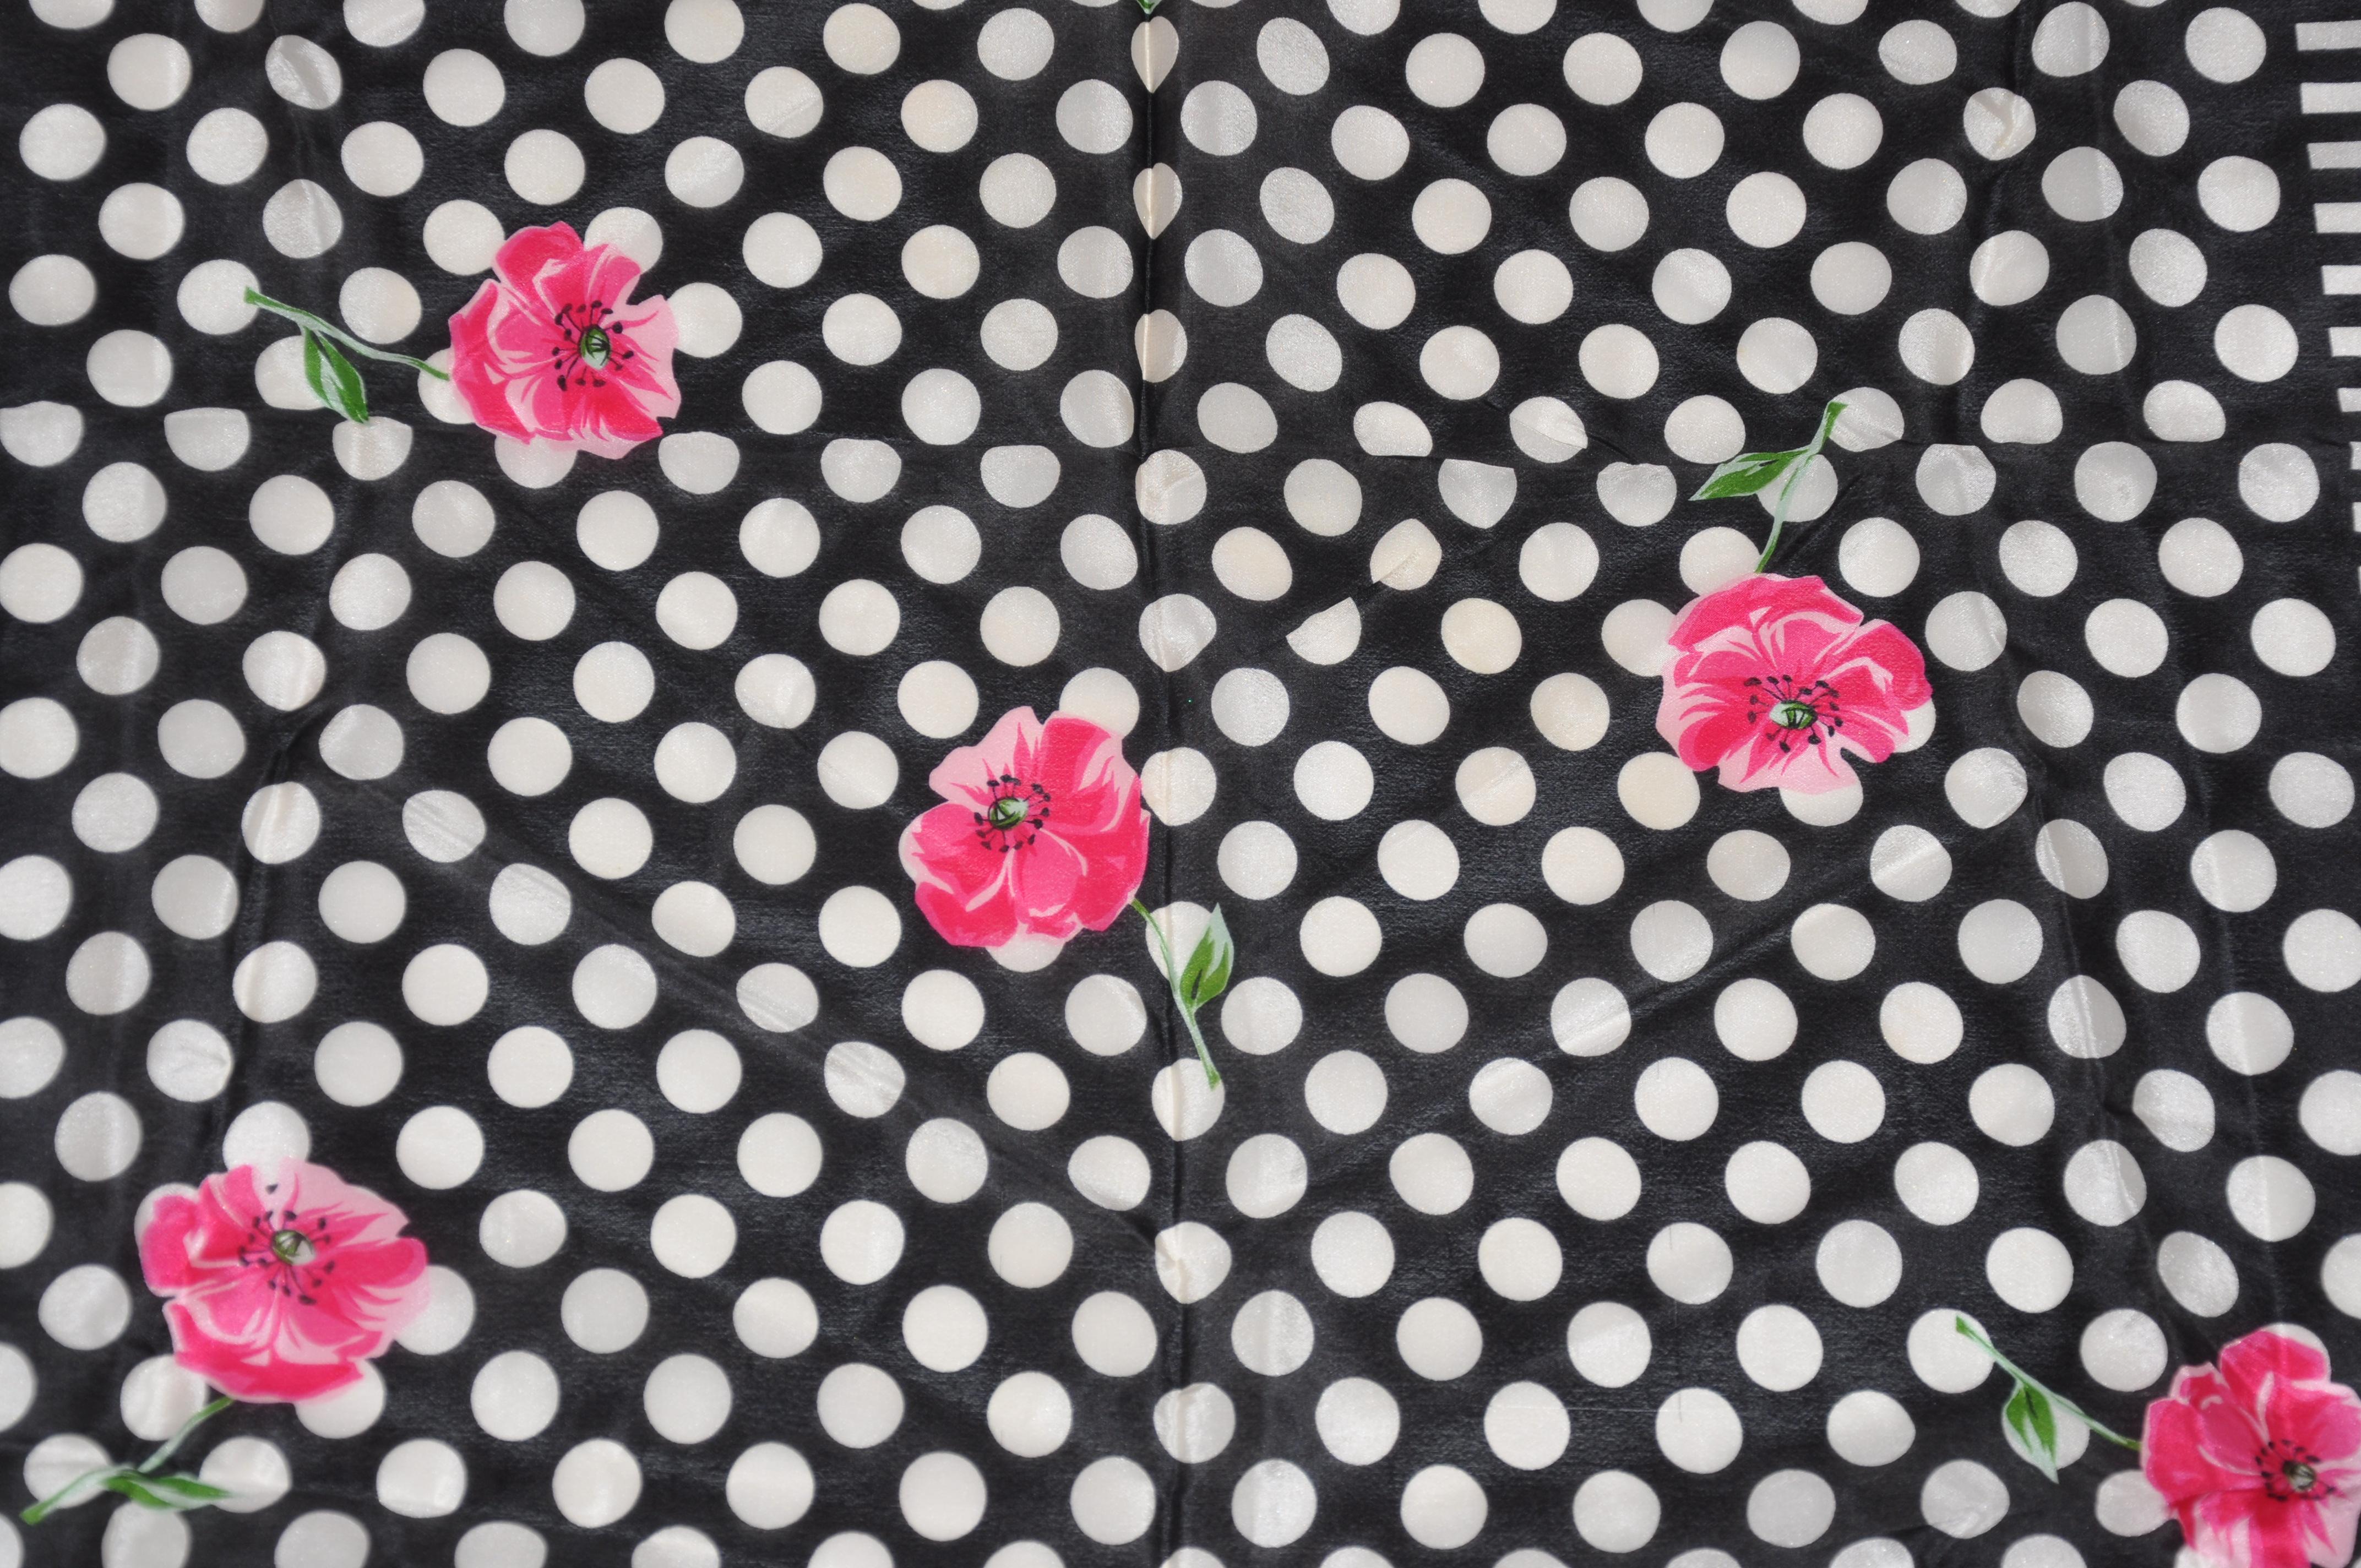        Adrienne Vittadini Wonderfully Joyous Popping Fuchsia Florals among Bold black and white stripes and polka dots silk scarf accented with rolled edges, measures 30 inches by 31 inches. Made in Italy.